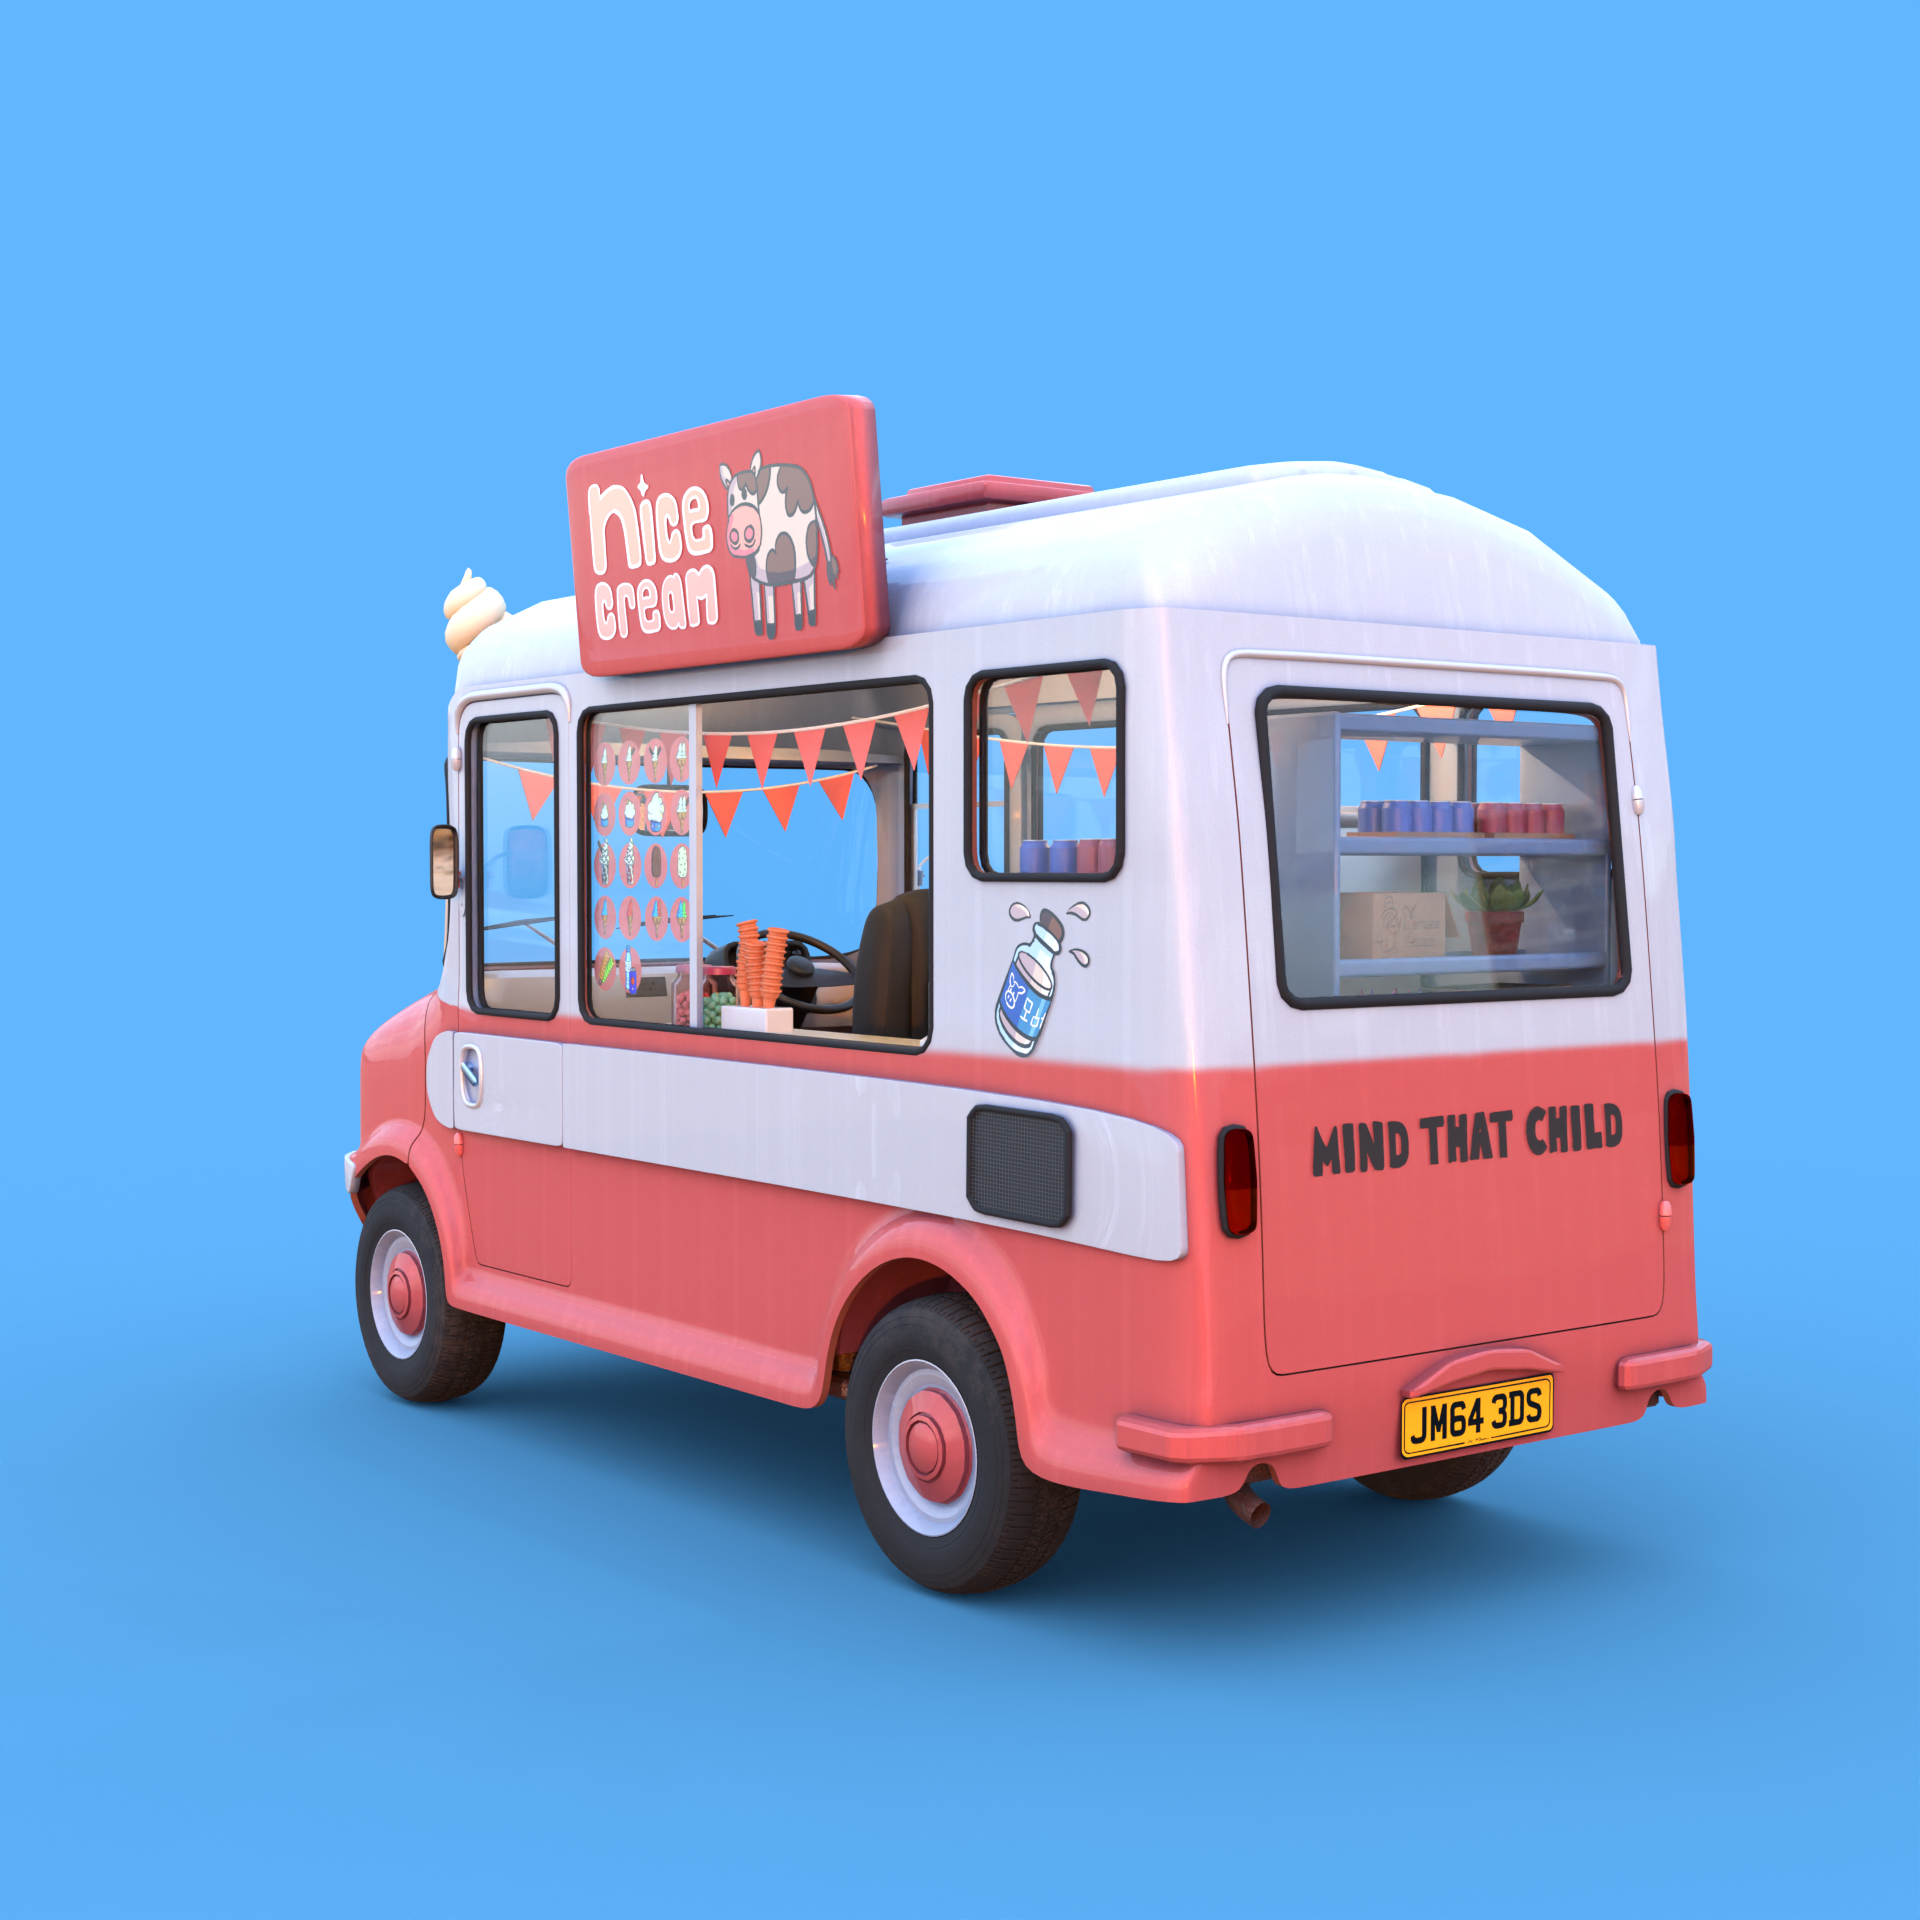 How to model ice cream? Need help - Modeling - Blender Artists Community